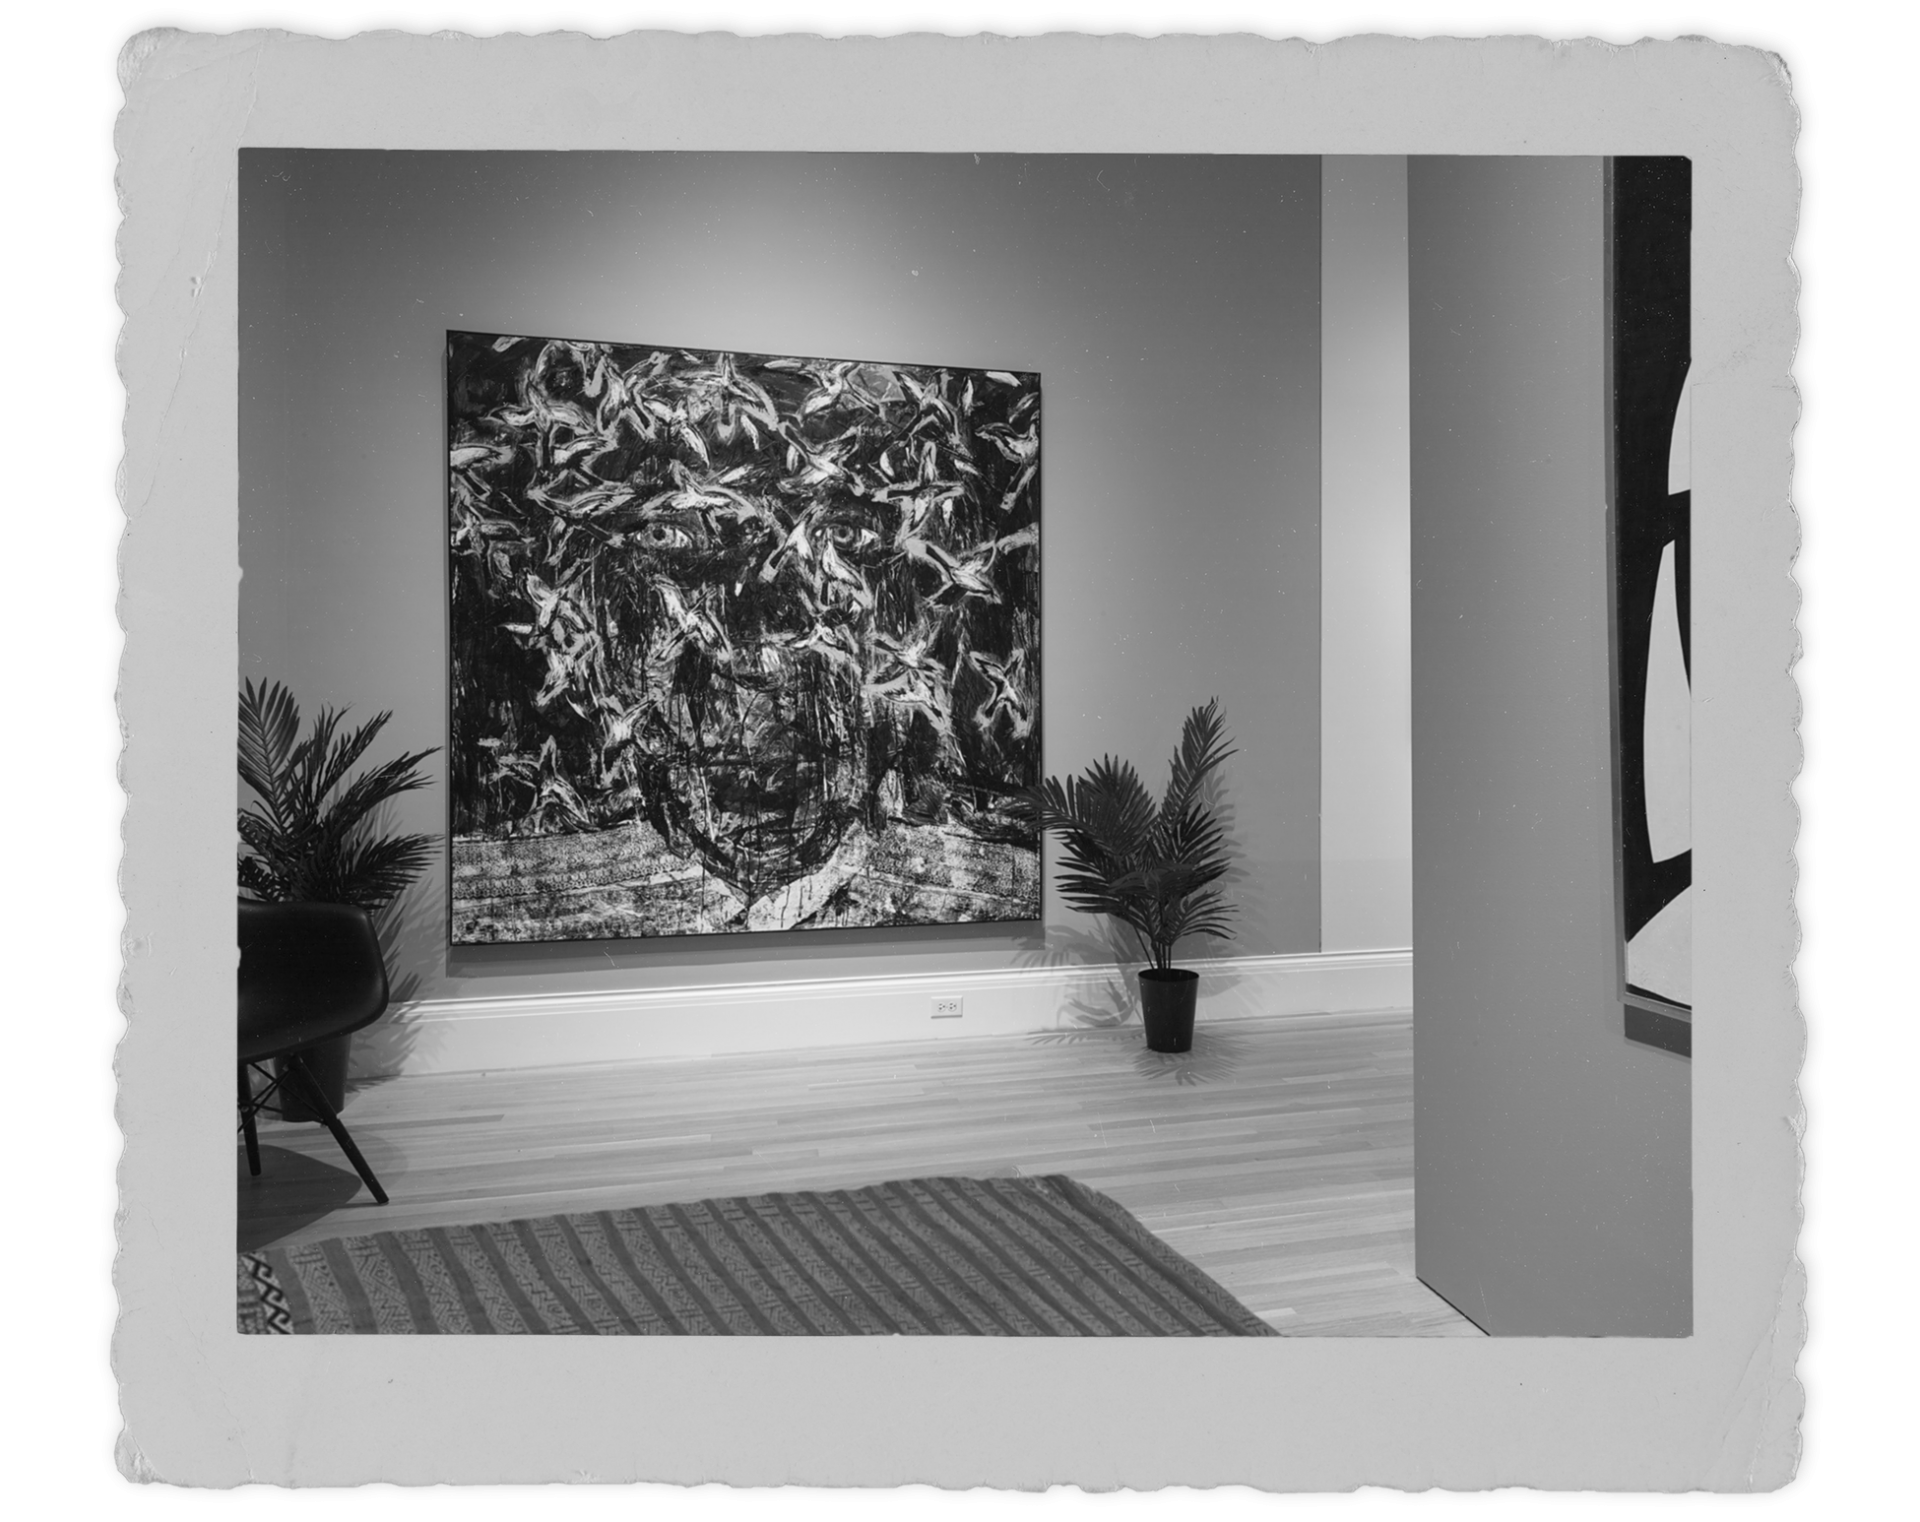 Spirit of the Colony by Arnaldo Roche Rabell, hanging in a mid century modern interior